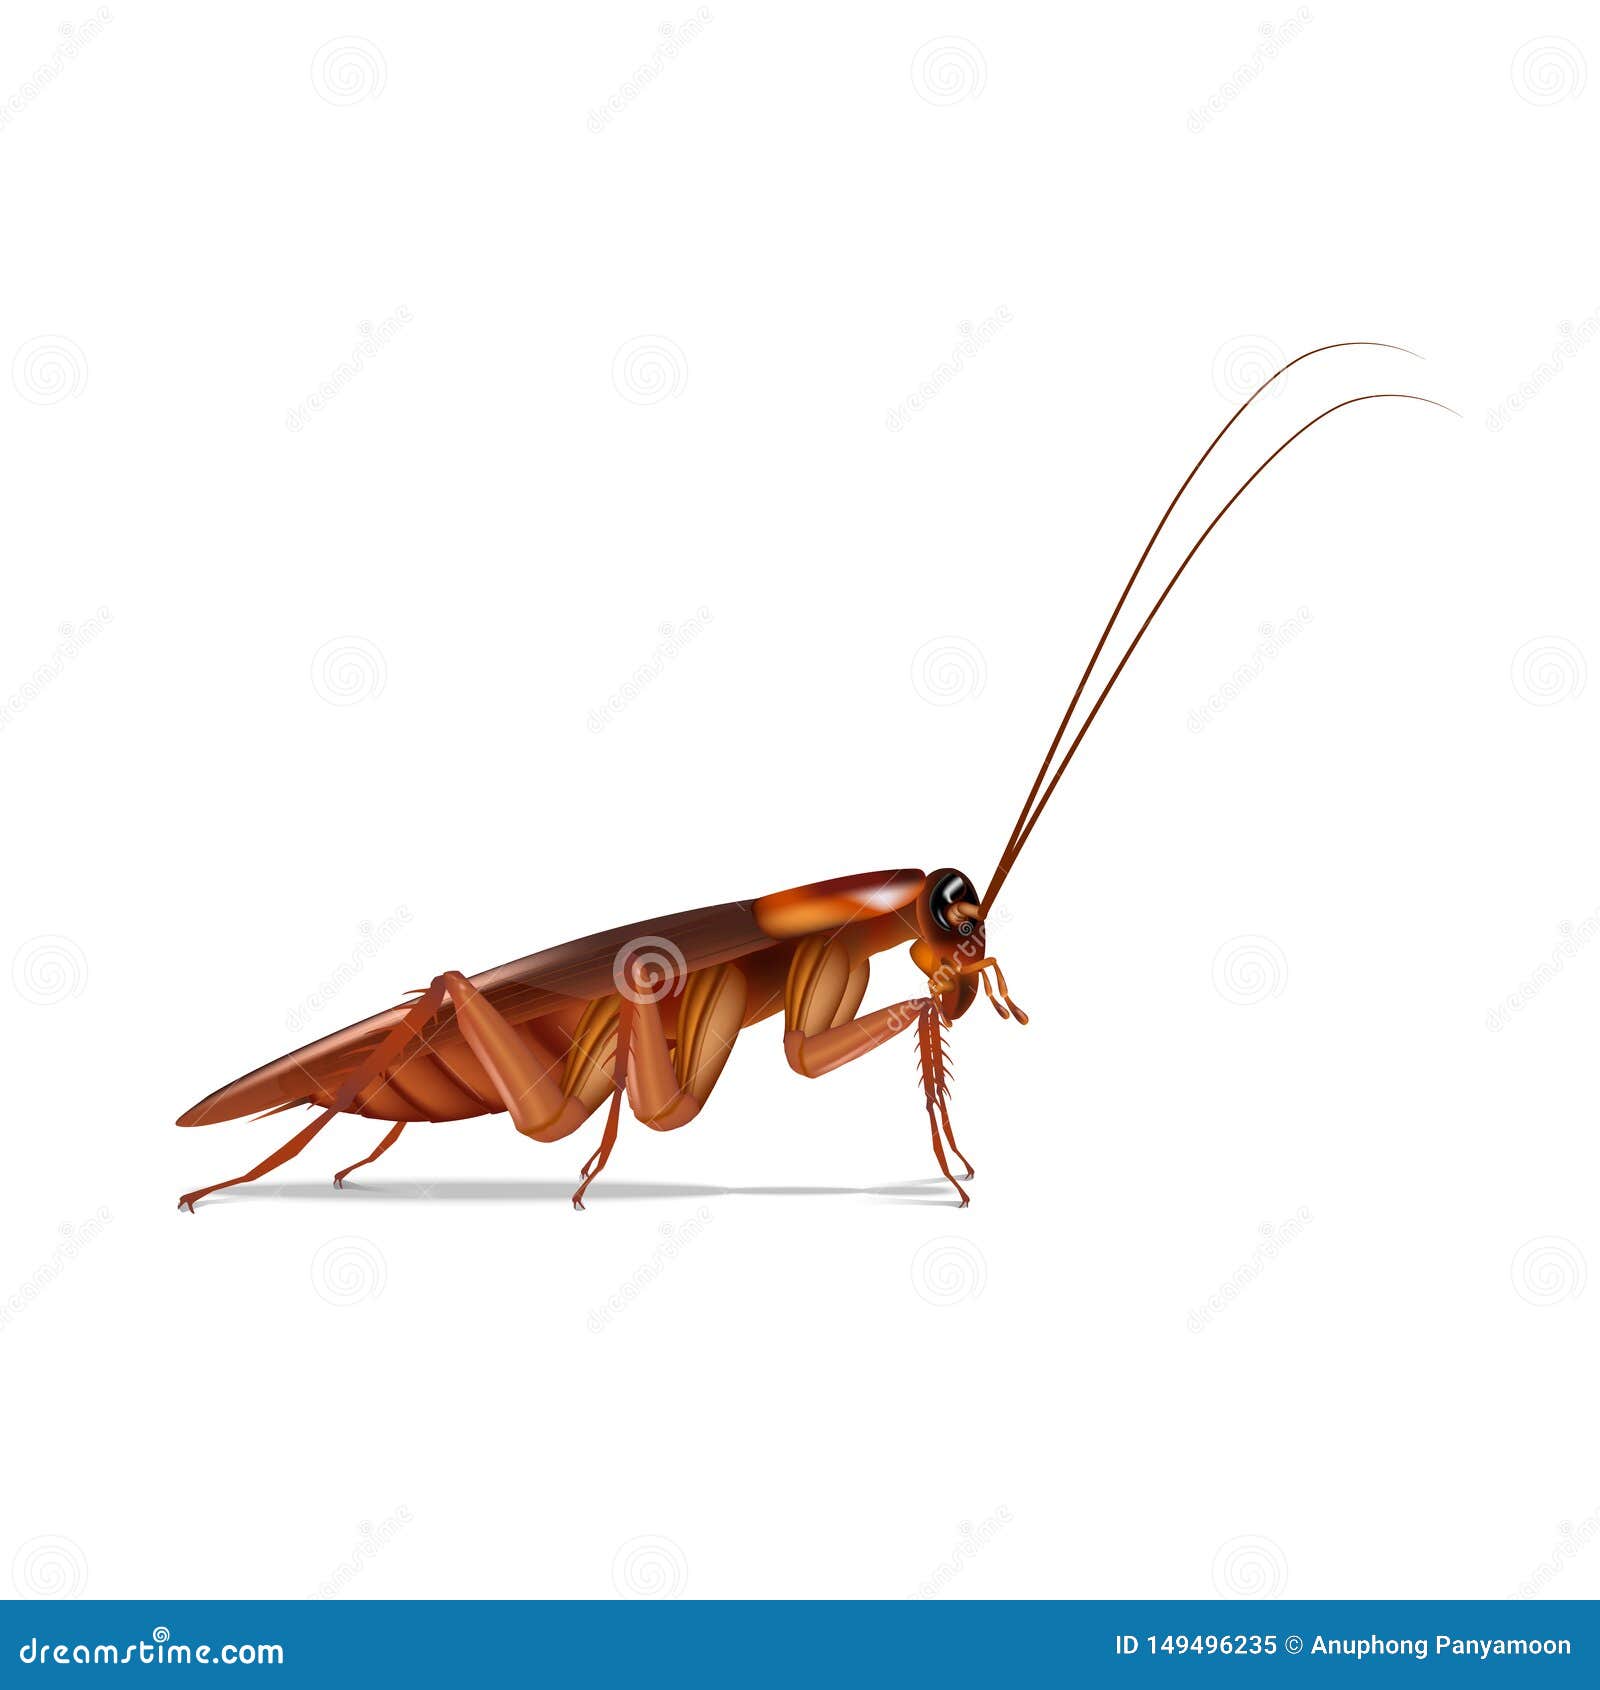 Cockroaches Side Vector Isolate on White Background Stock Vector ...